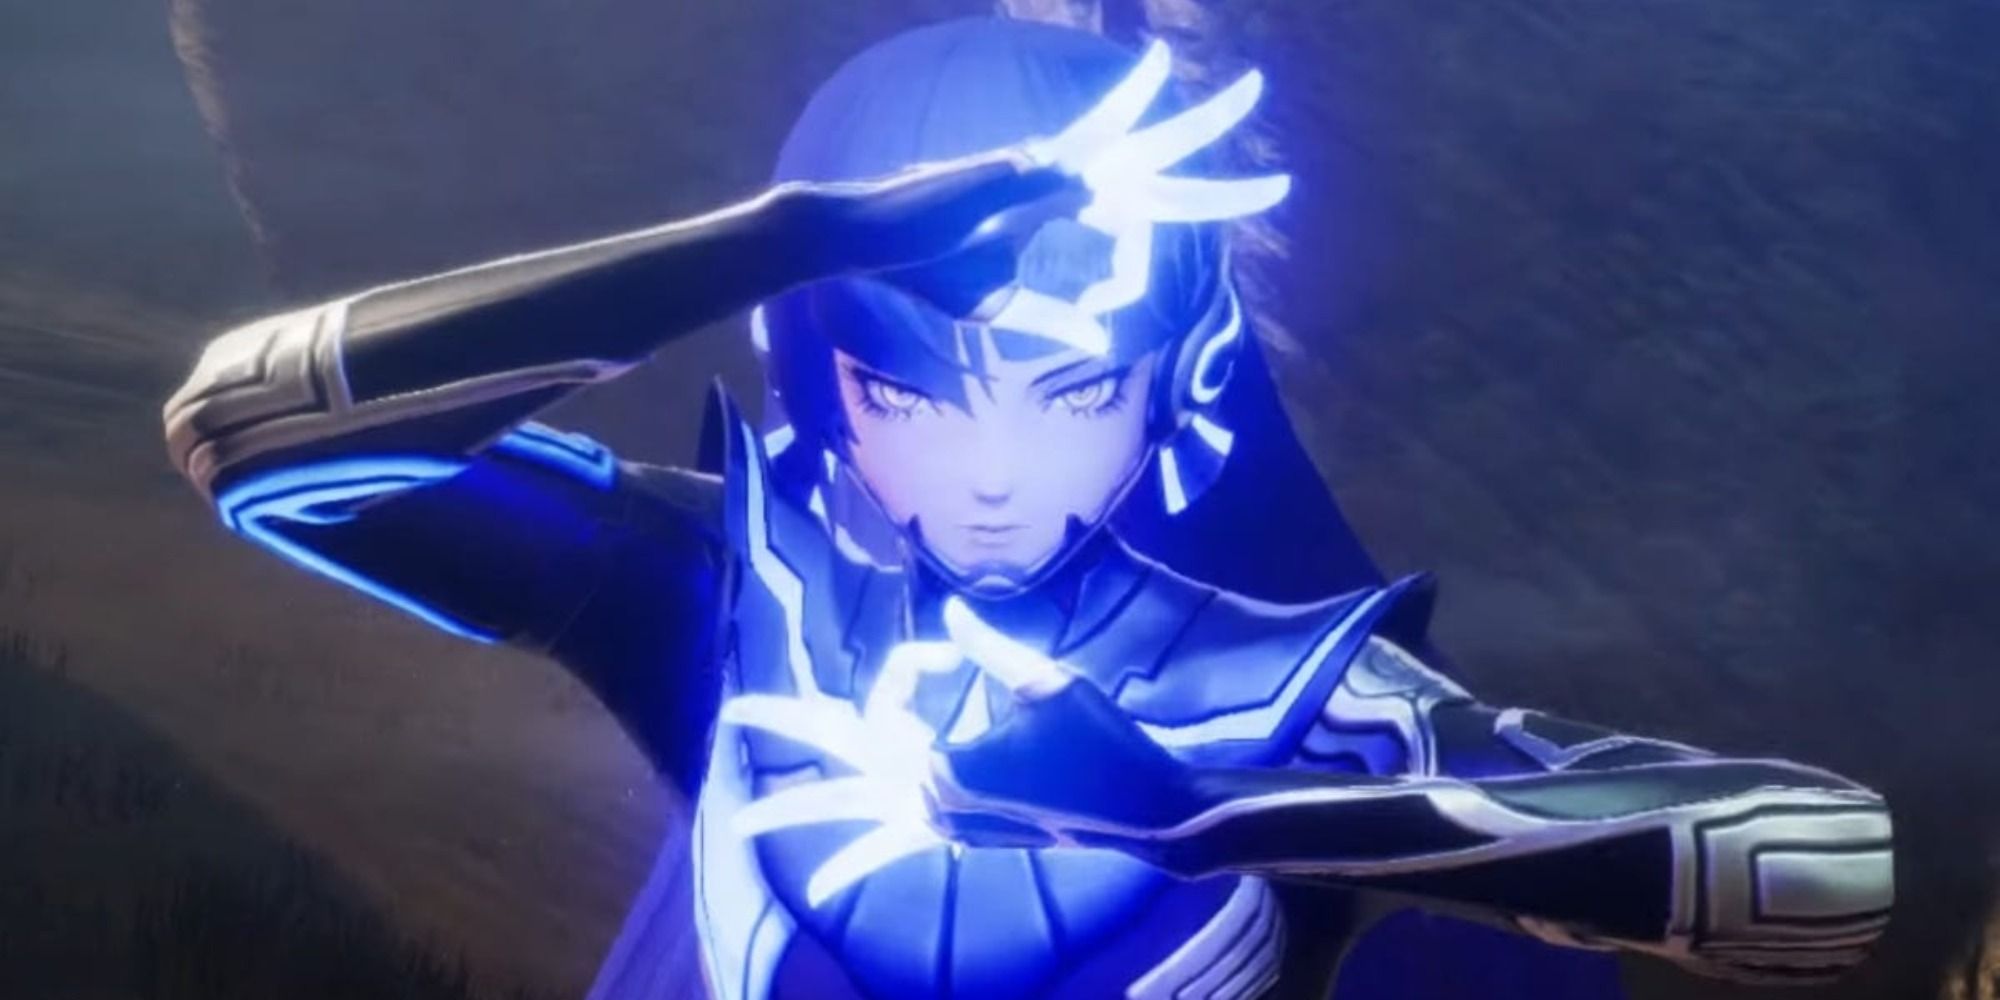 The main protagonist performing a Miracle in Shin Megami Tensei 5